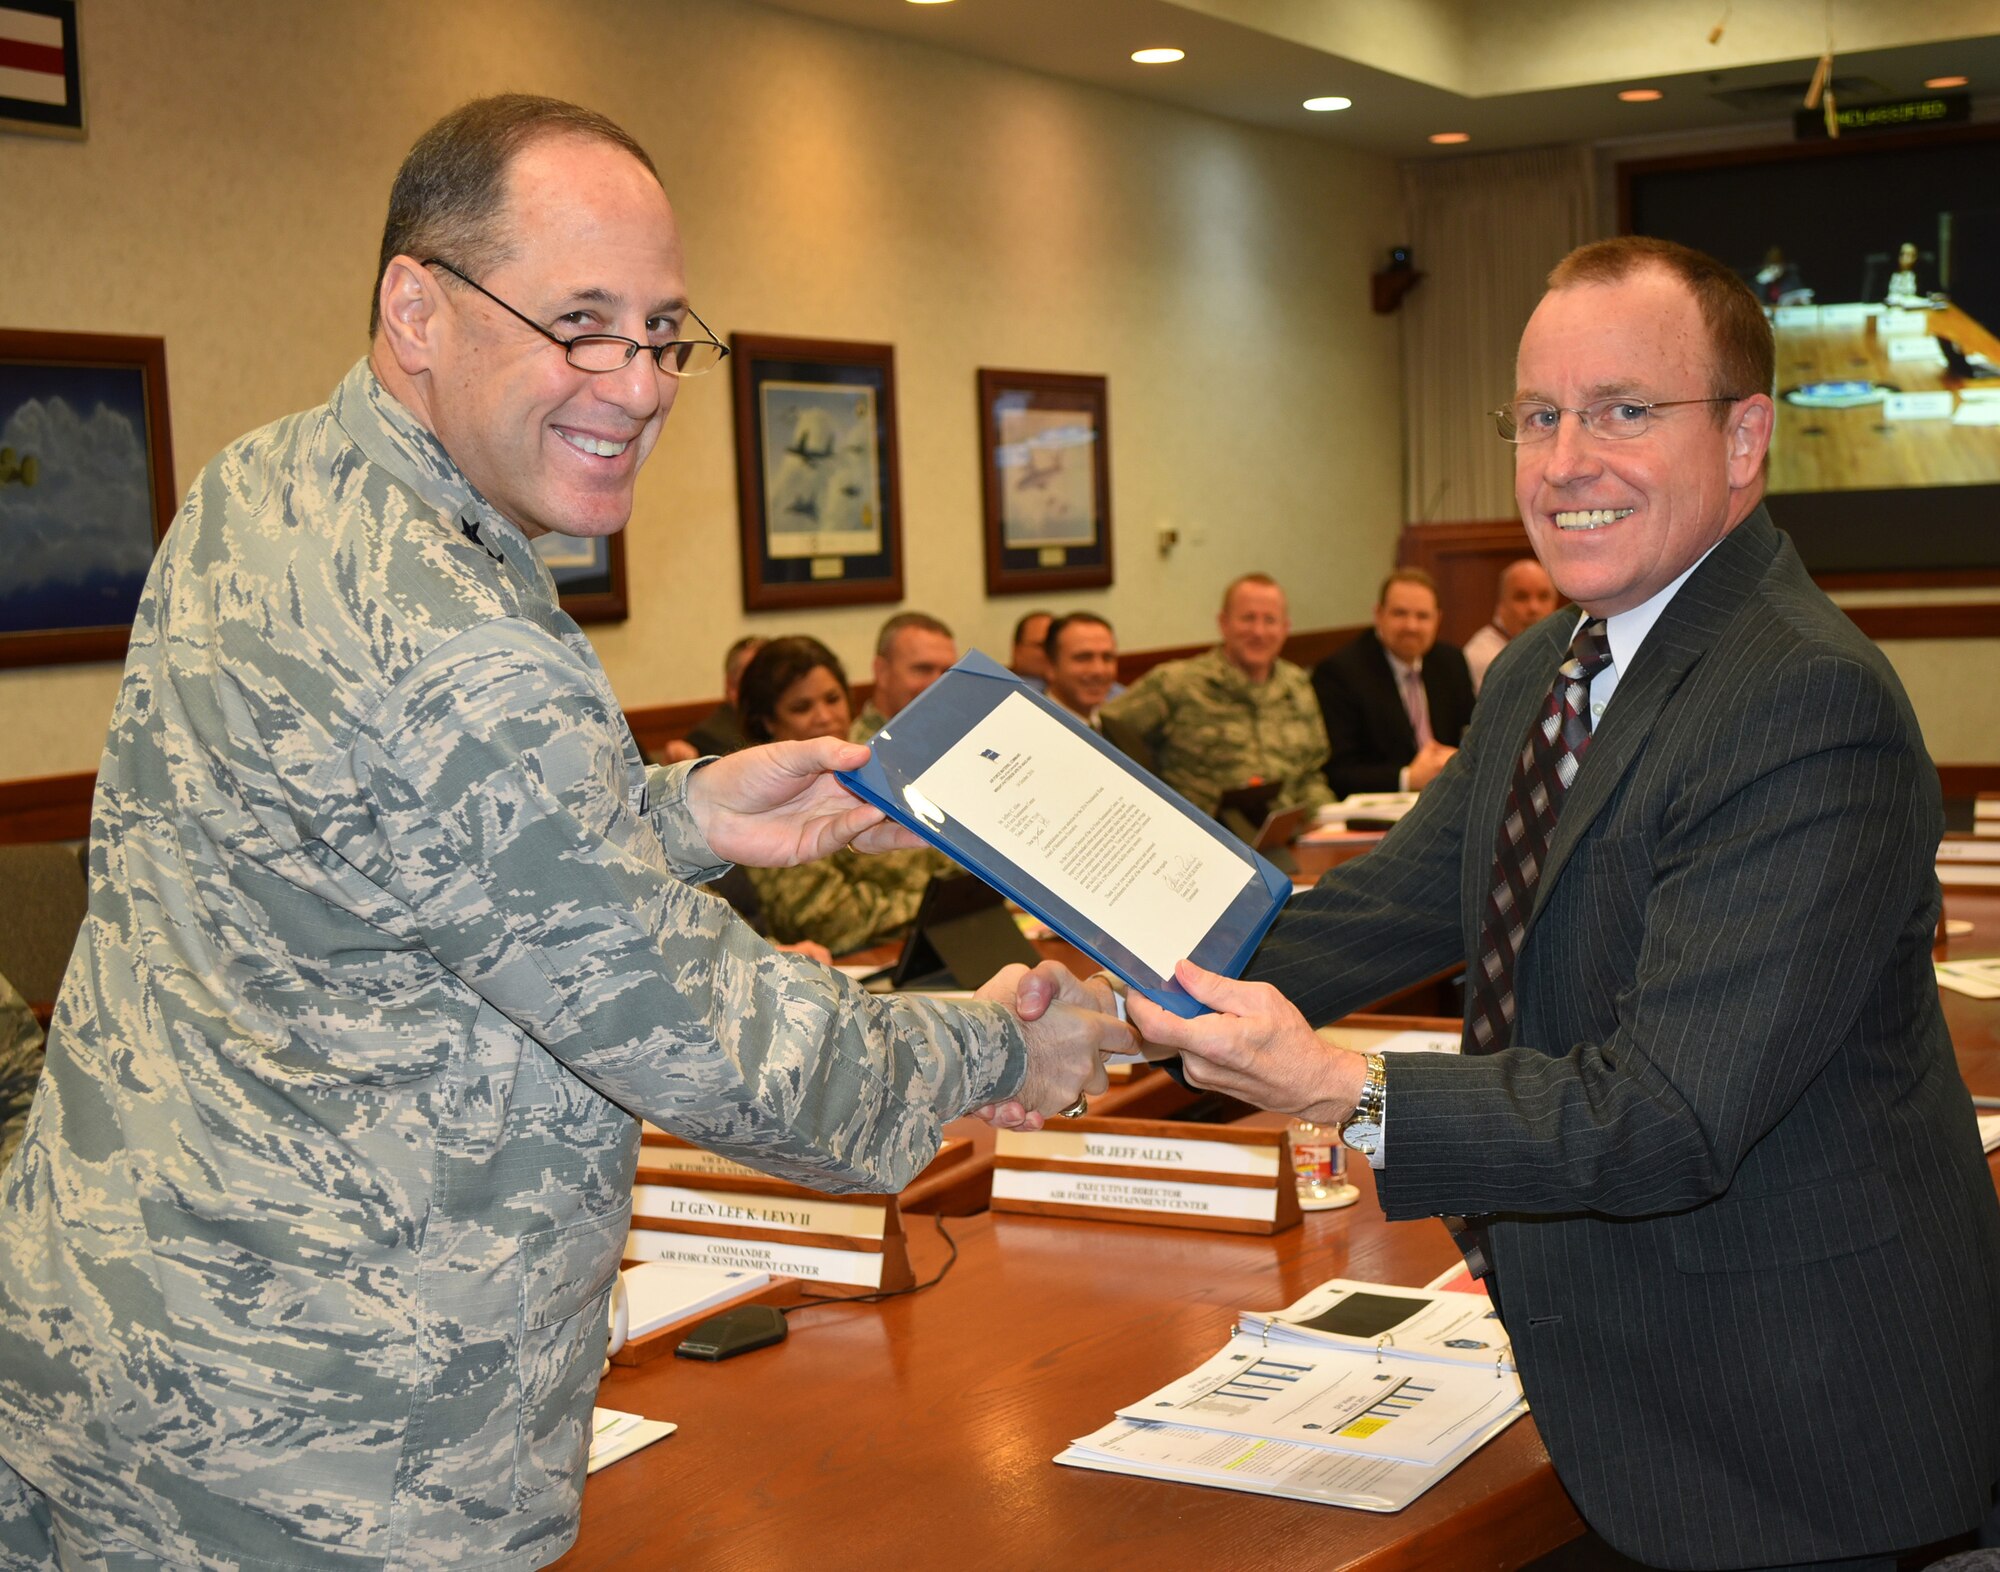 Lt. Gen. Lee K. Levy II, Air Force Sustainment Center commander, presents Jeffrey Allen, AFSC executive director, with a letter from Gen. Ellen Pawlikowski, Air Force Materiel Command commander, congratulating him on being a recipient of the 2016 Presidential Rank Award of Meritorious Executive. The award will be presented by the President of the United States in a formal ceremony later this year. (Air Force photo by Darren D. Heusel)